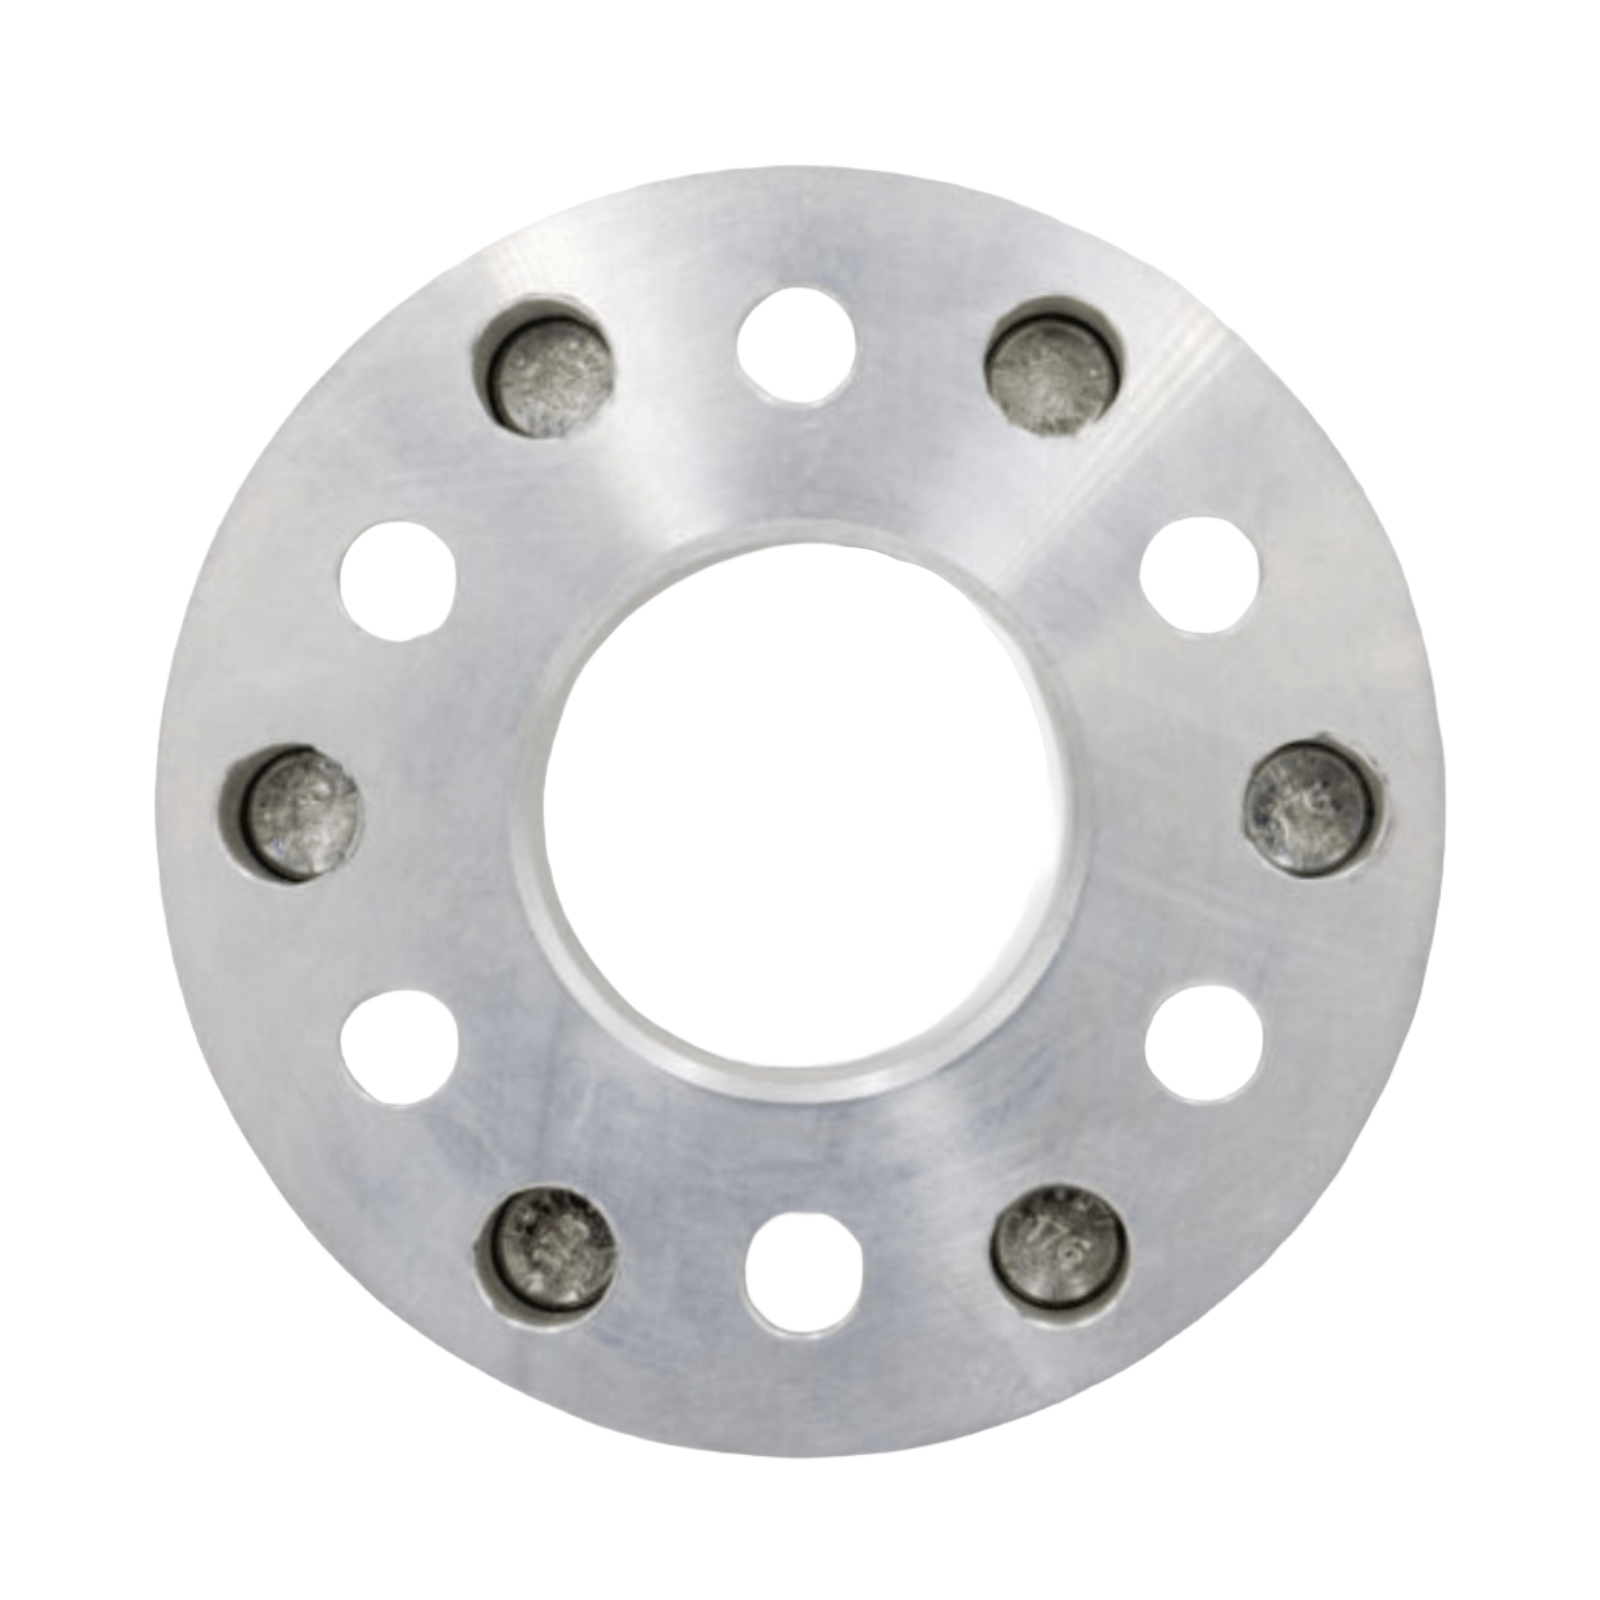 6x5.5 to 6x5.5 Wheel Spacer/Adapter - Thickness: 3/4- 4